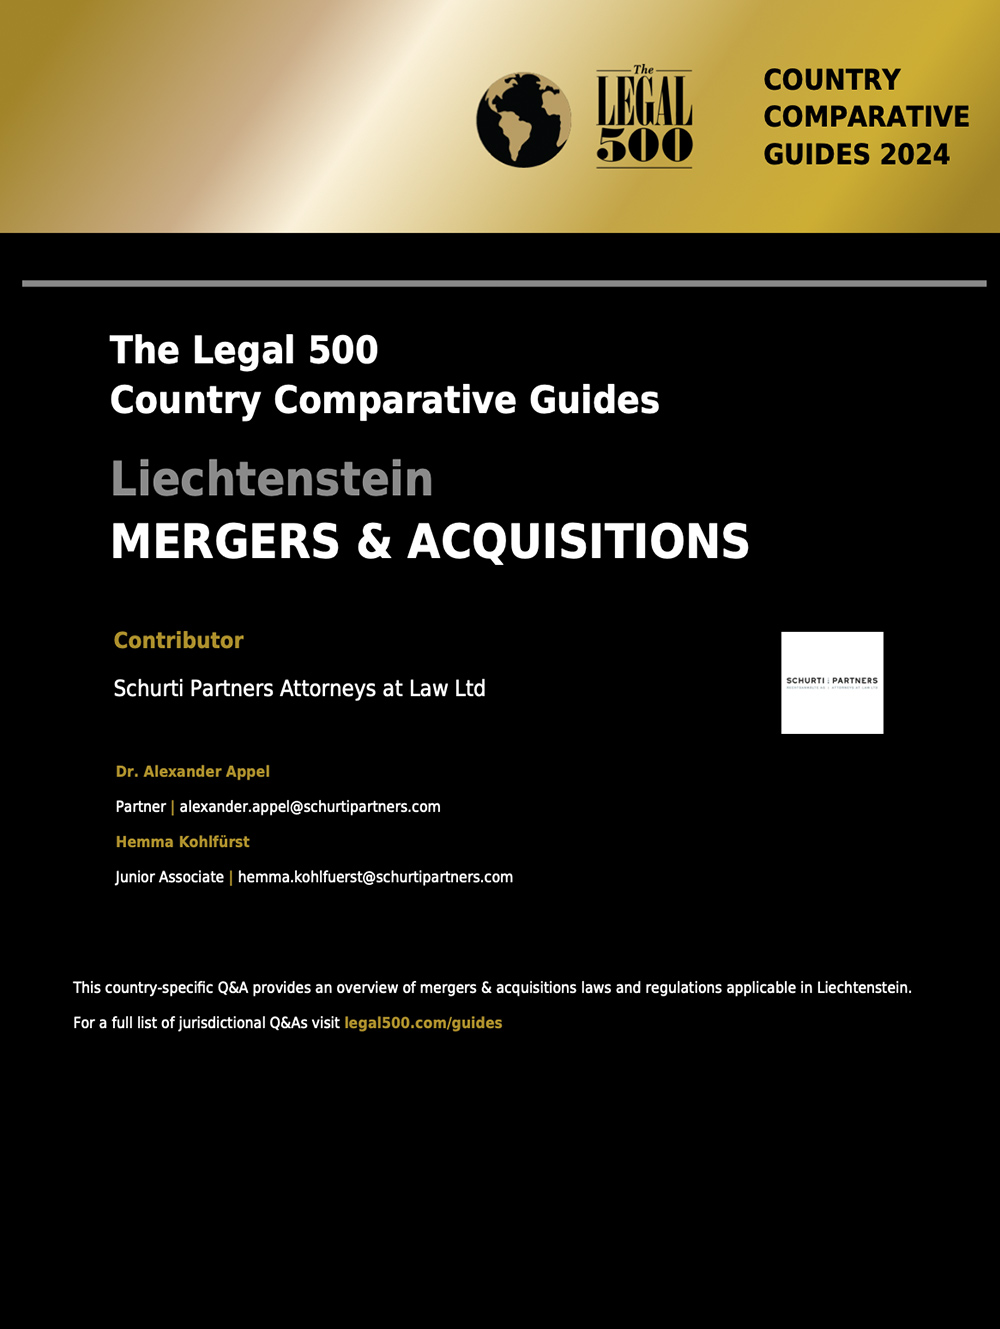 The Legal 500 | Mergers & Acquisitions 2024